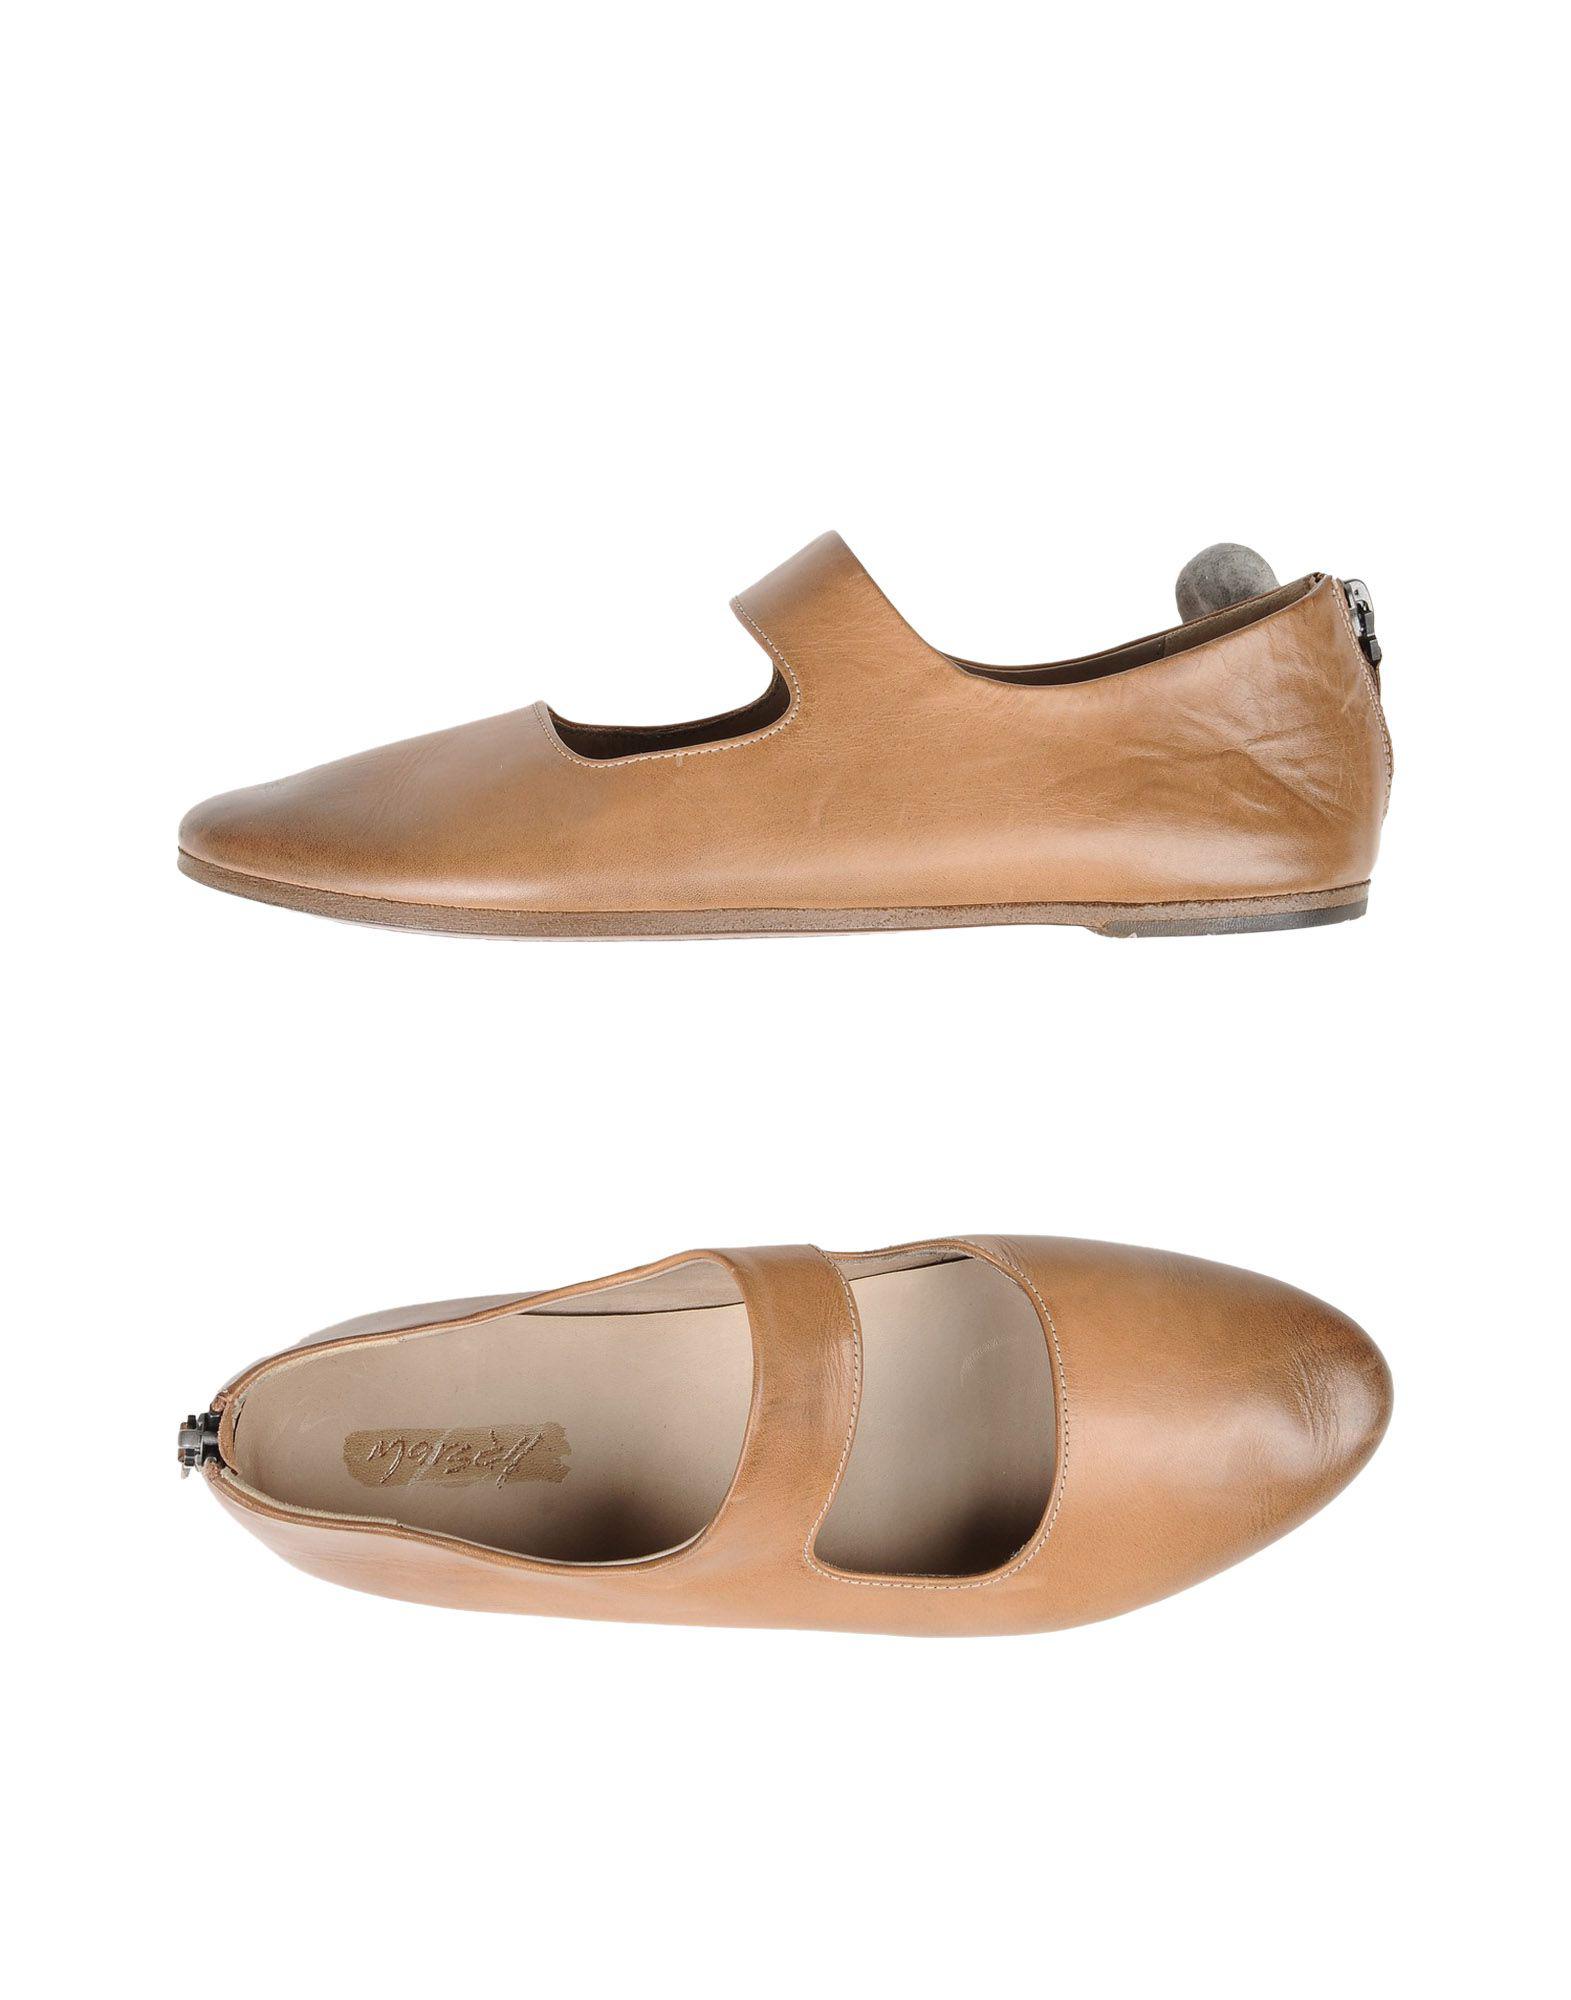 Marsèll Leather Ballet Flats in Camel 